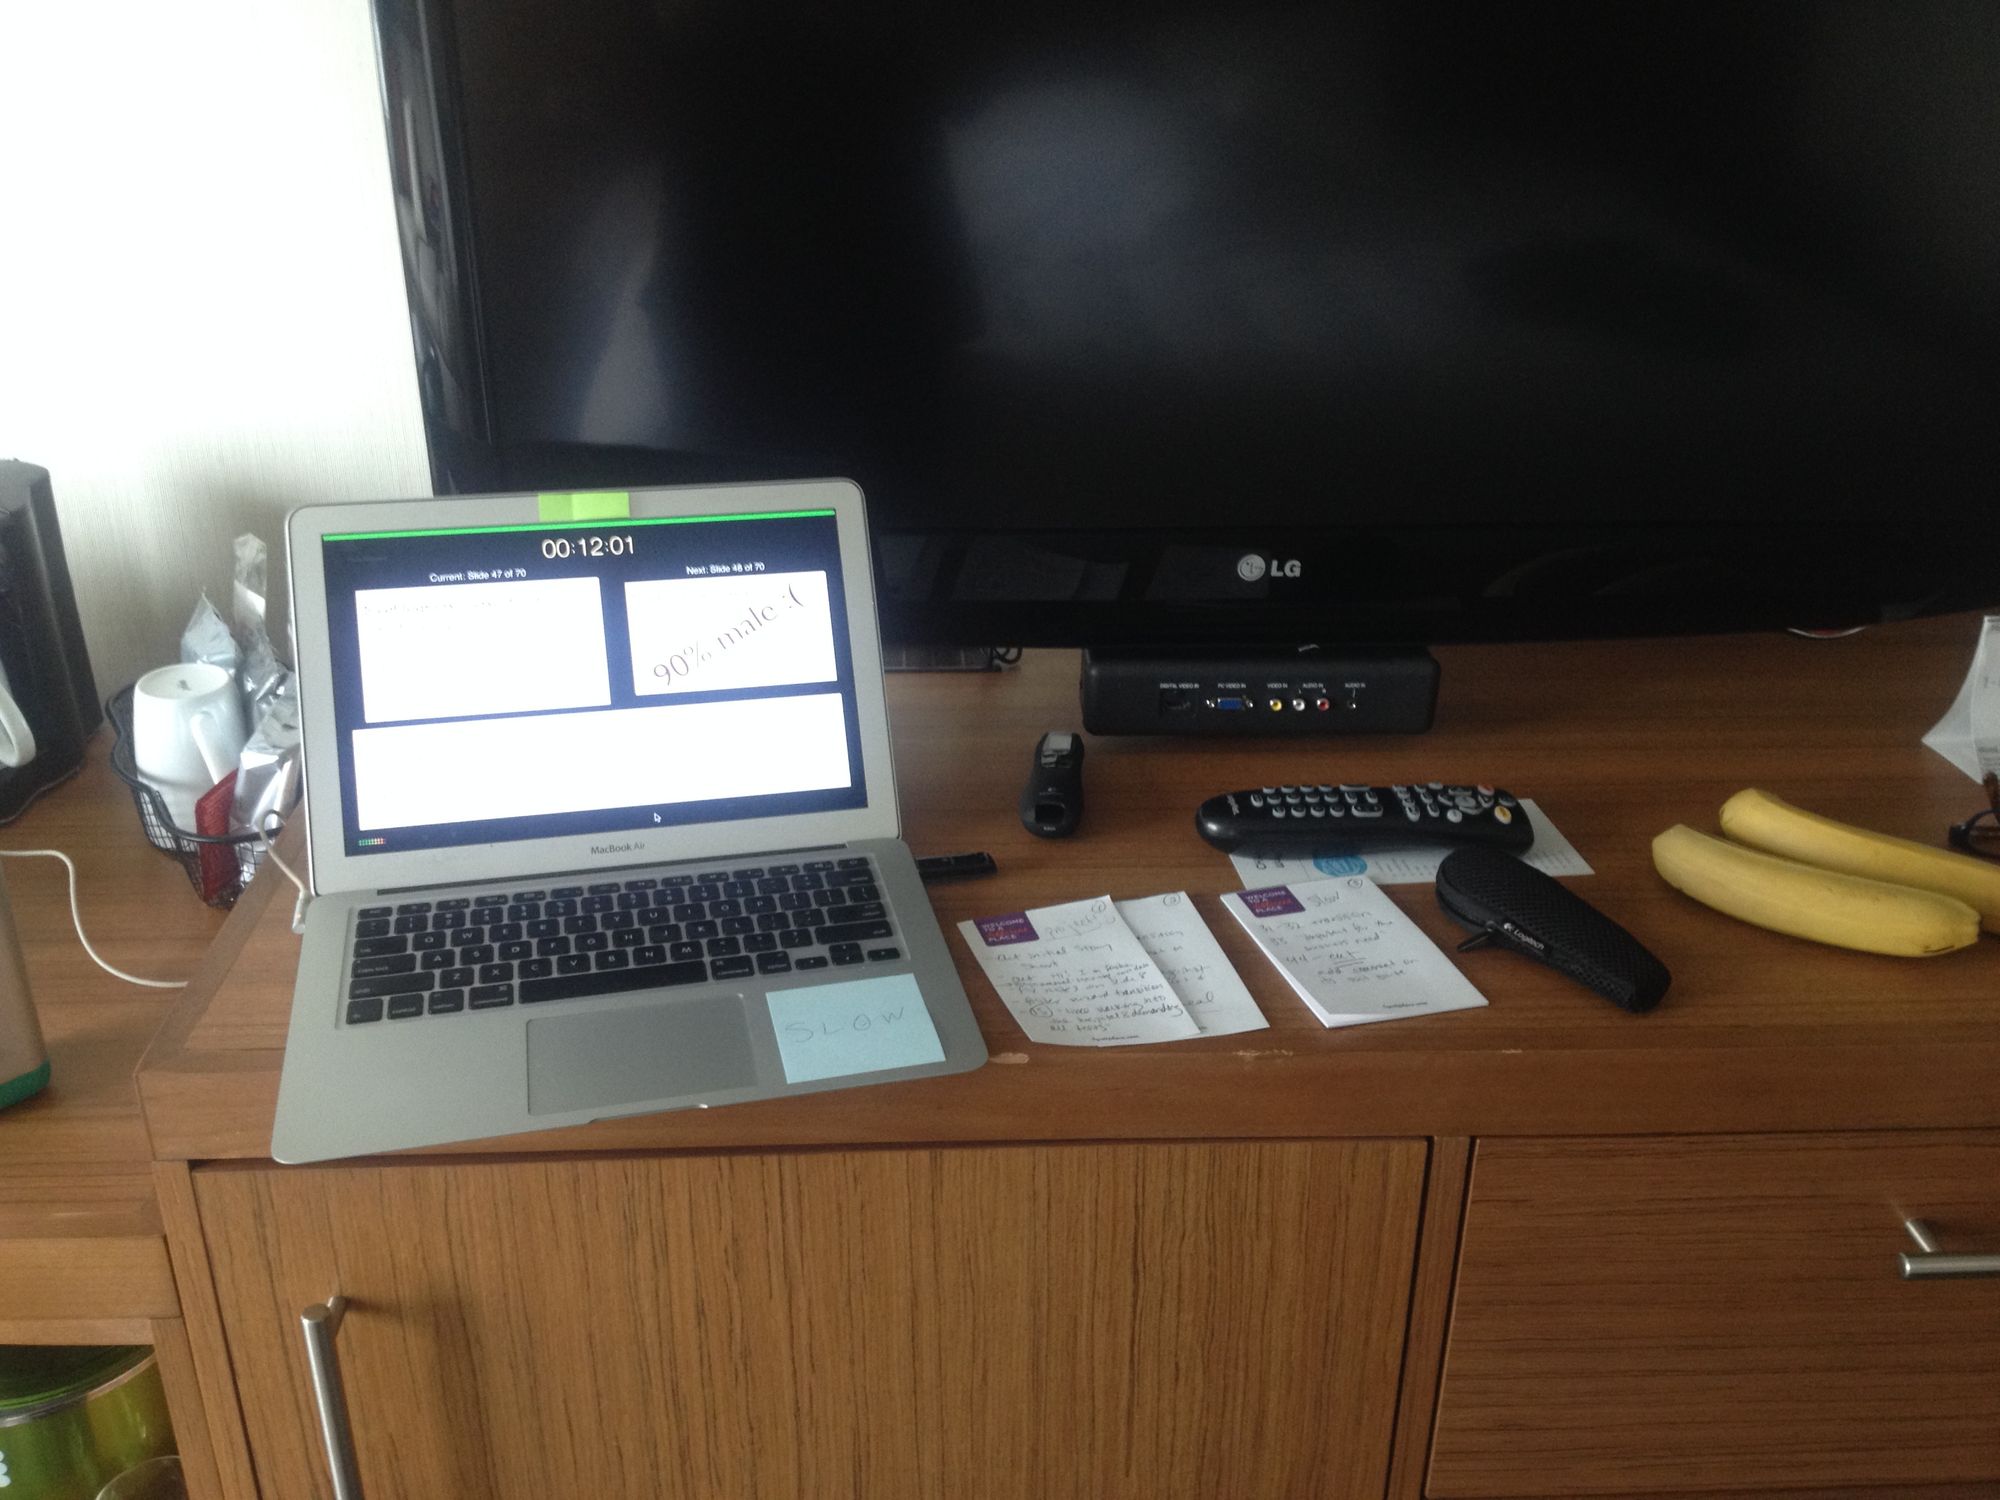 A picture of my laptop and notes on a hotel dresser.